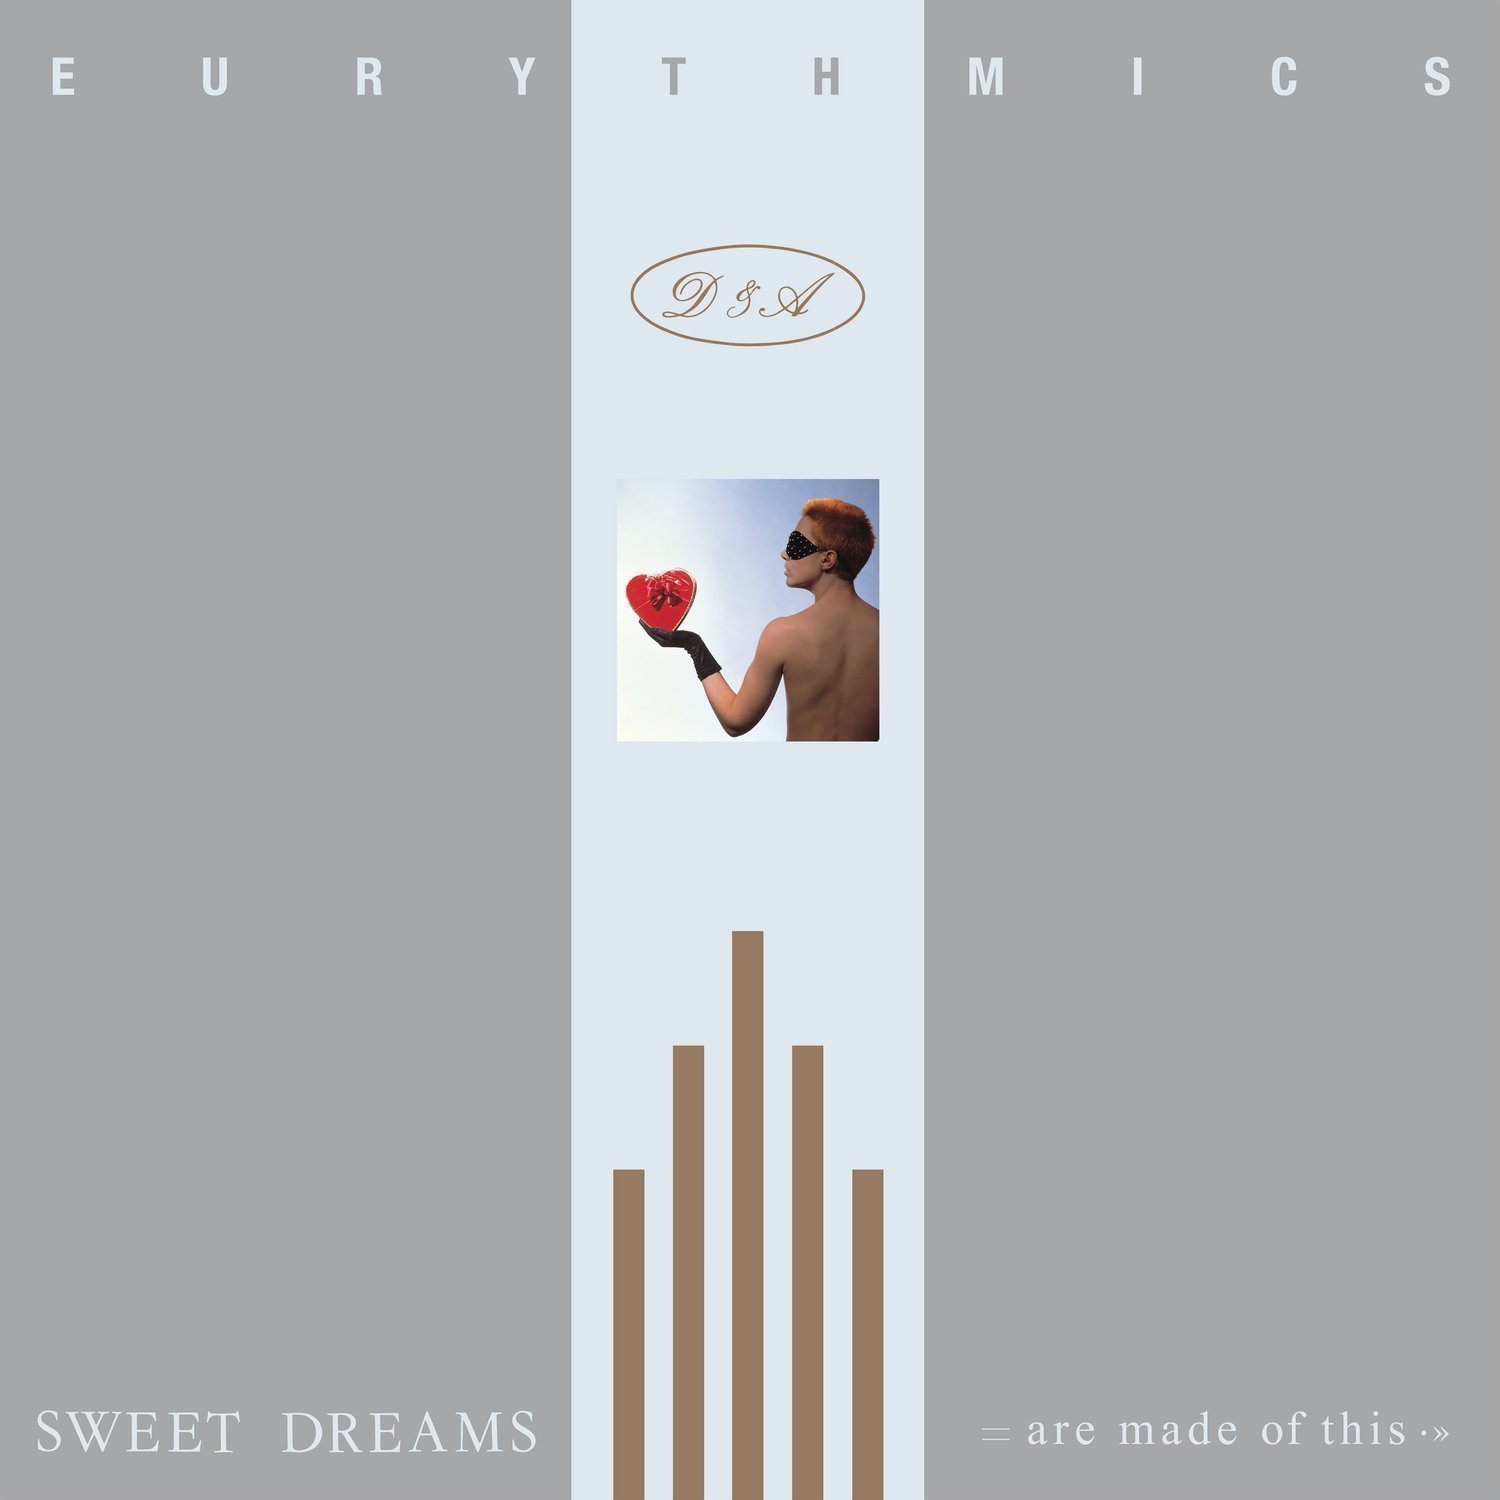 Vinylplade Eurythmics Sweet Dreams (Are Made of This)(LP)